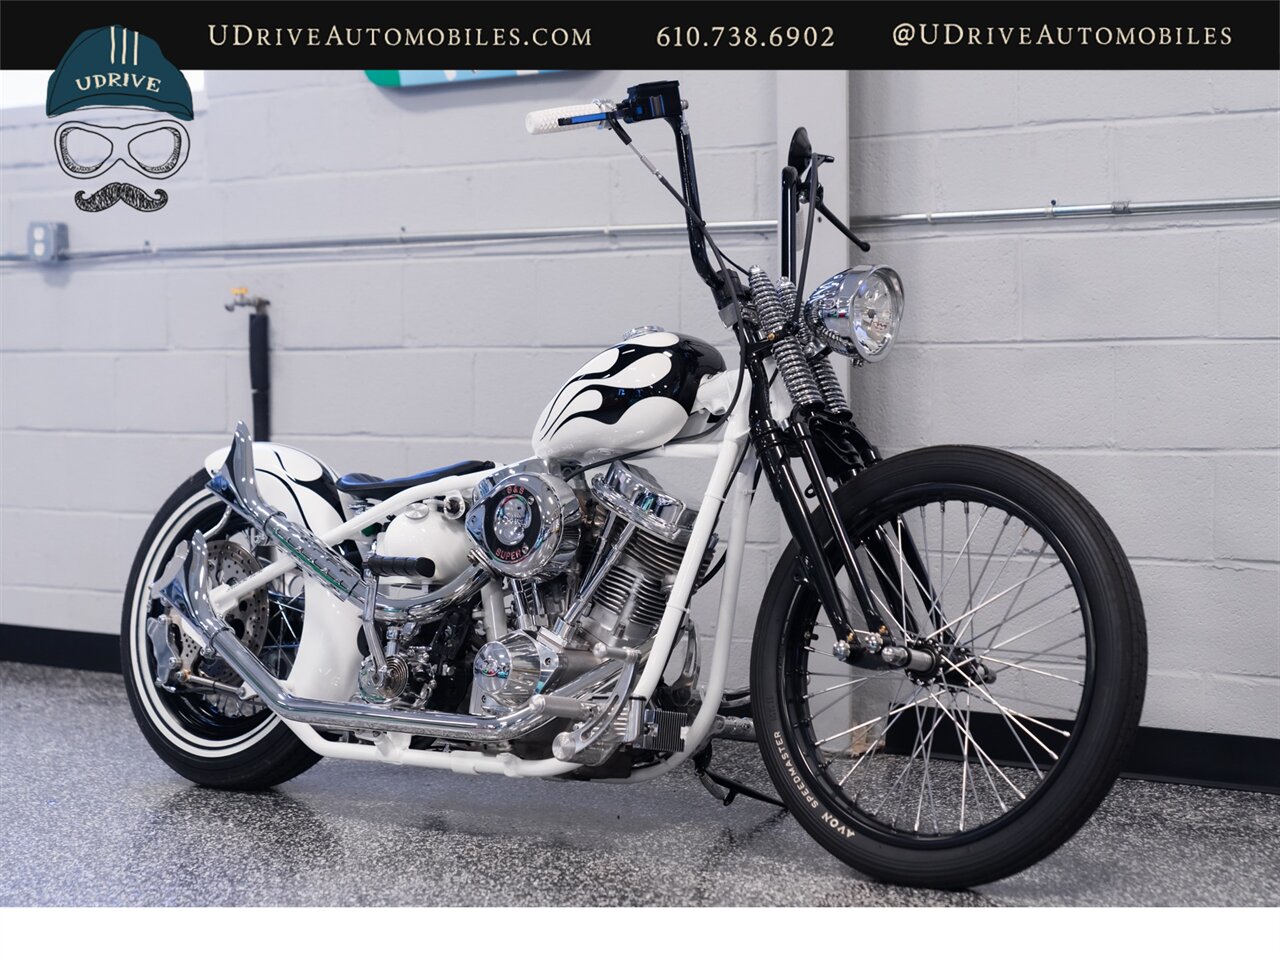 1972 Harley-Davidson Touring FLH Speedking Racing 93inch S&S P93 Panhead  Jeff Cochran Bobber Chopper - Photo 17 - West Chester, PA 19382